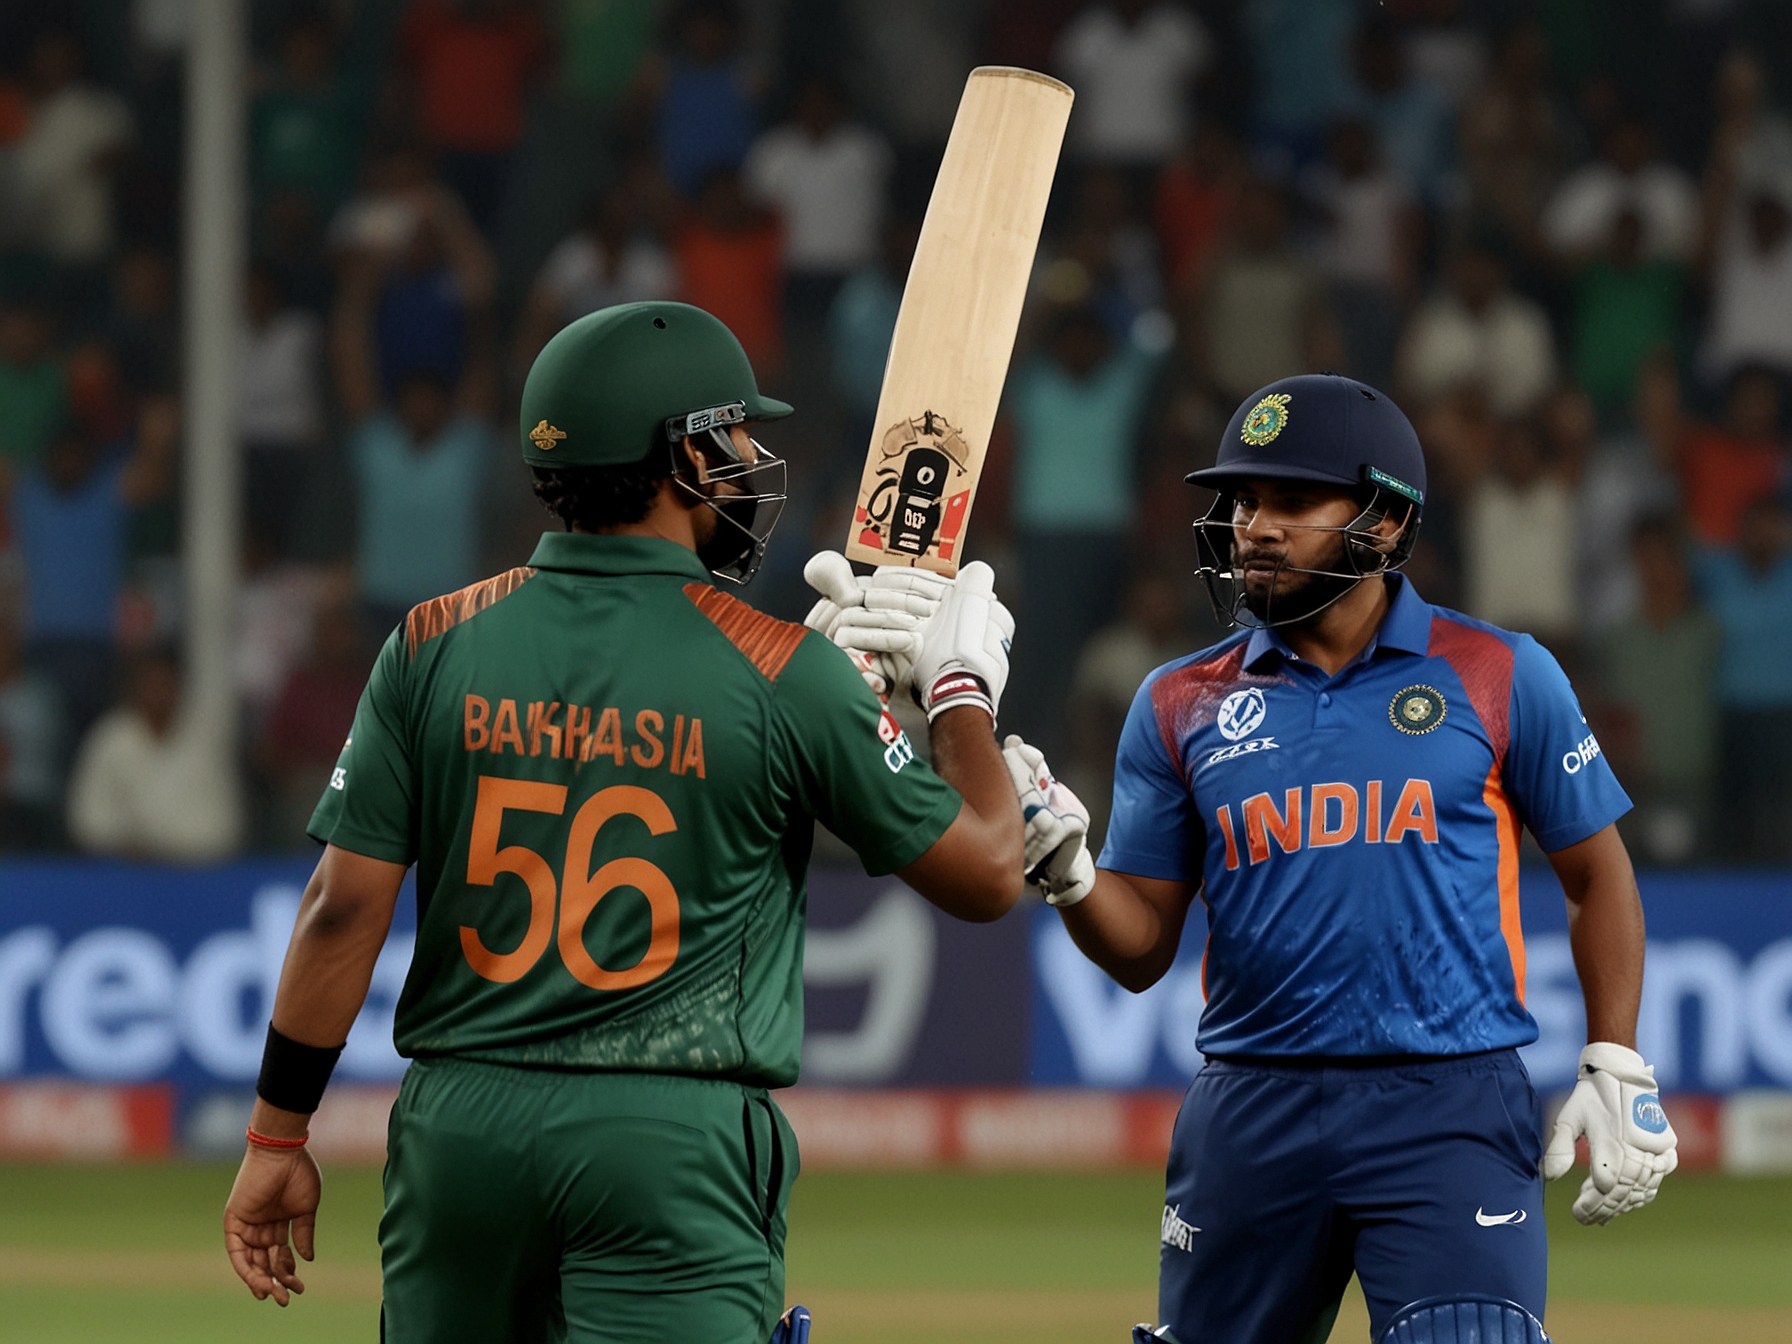 Bangladesh's Shakib Al Hasan bowls against Indian captain Rohit Sharma, achieving a significant milestone in the T20 World Cup 2024 despite his team's loss.